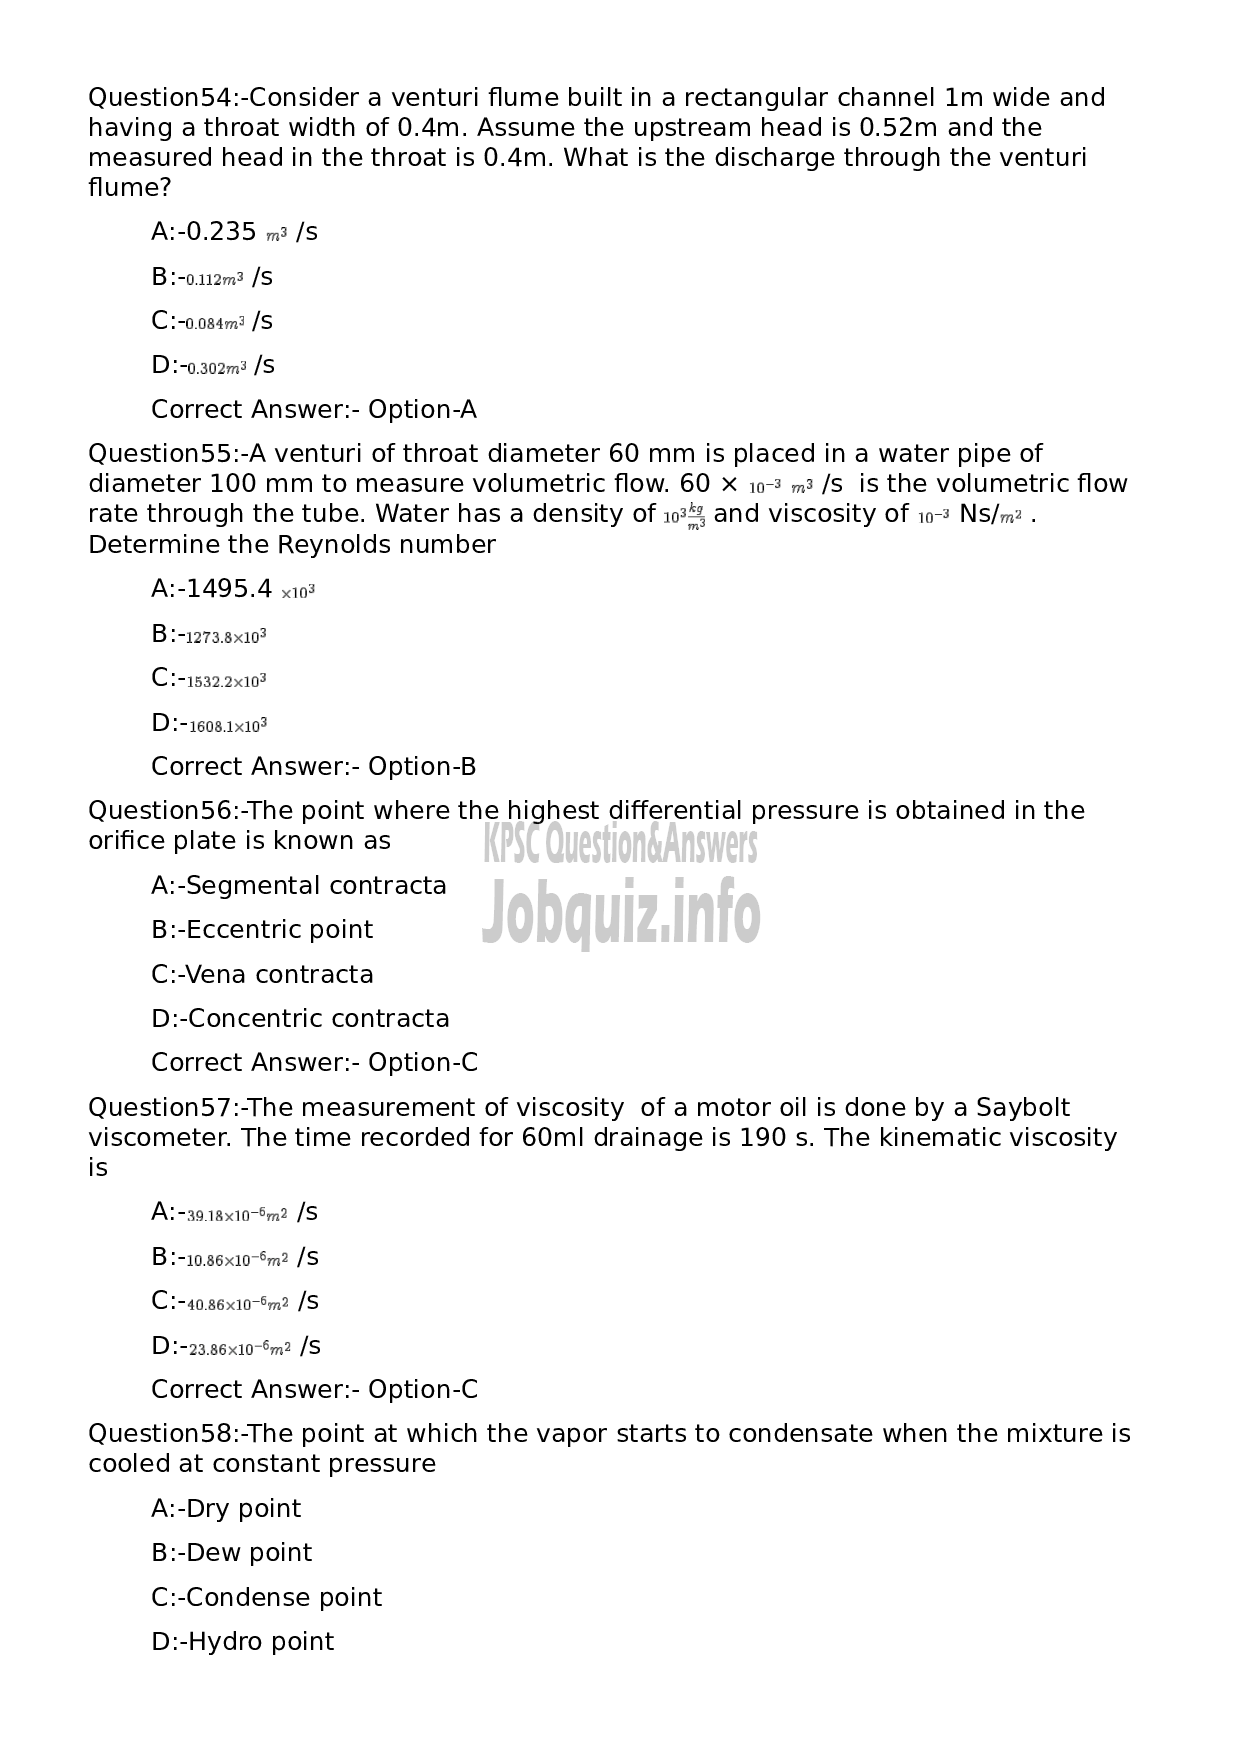 Kerala PSC Question Paper - Lecturer in Electronics and Instrumentation (Polytechnics)-11